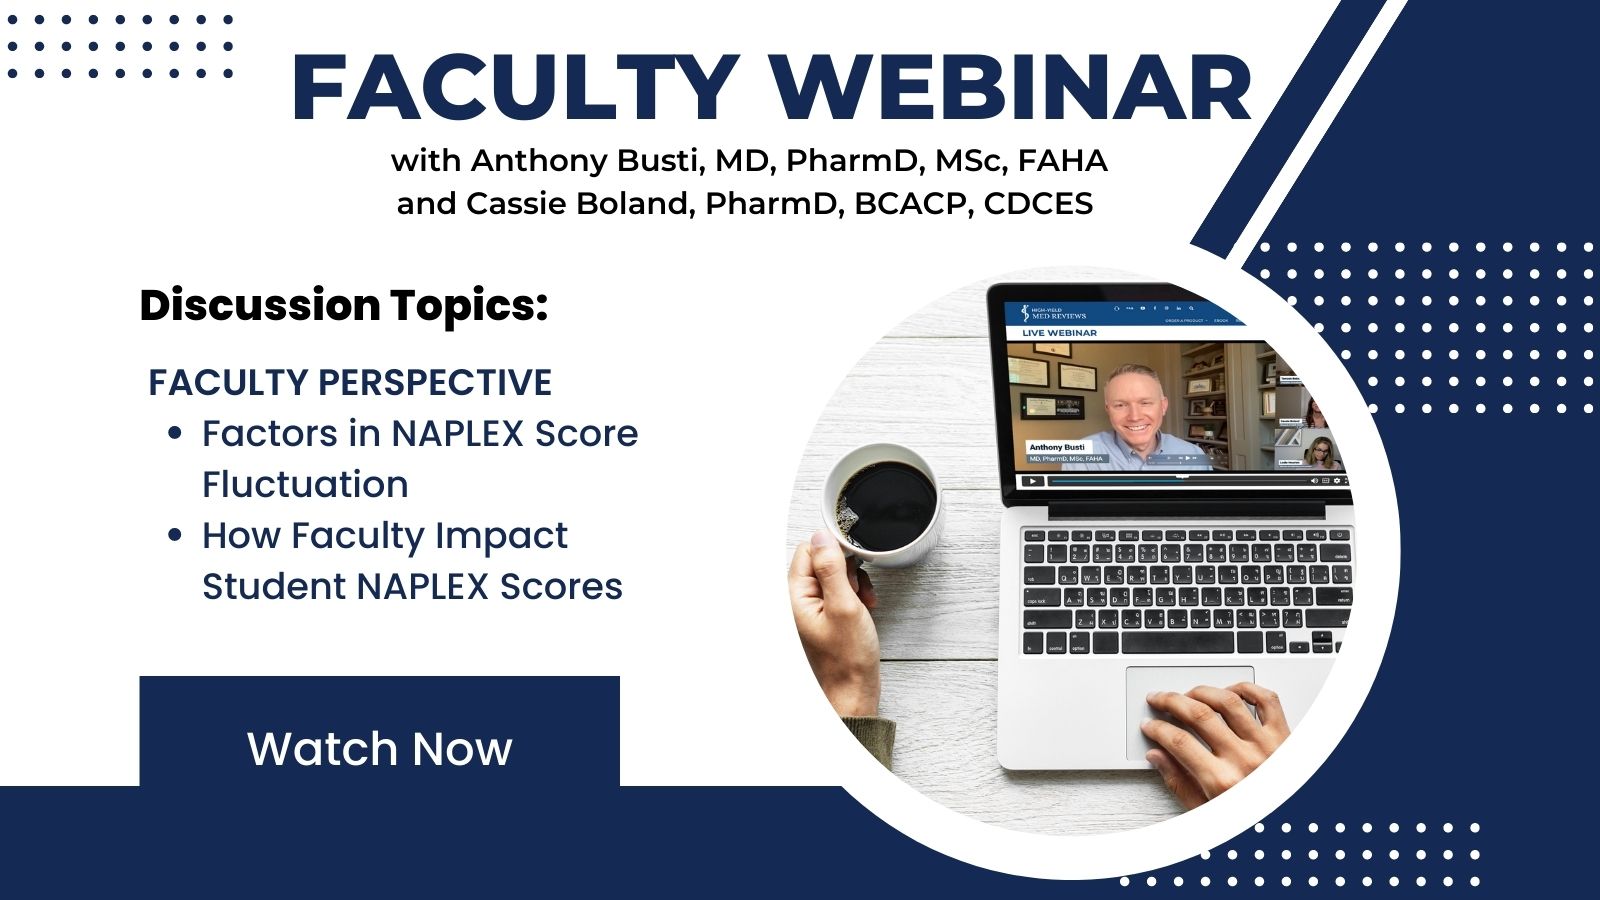 Interview with faculty on NAPLEX scores